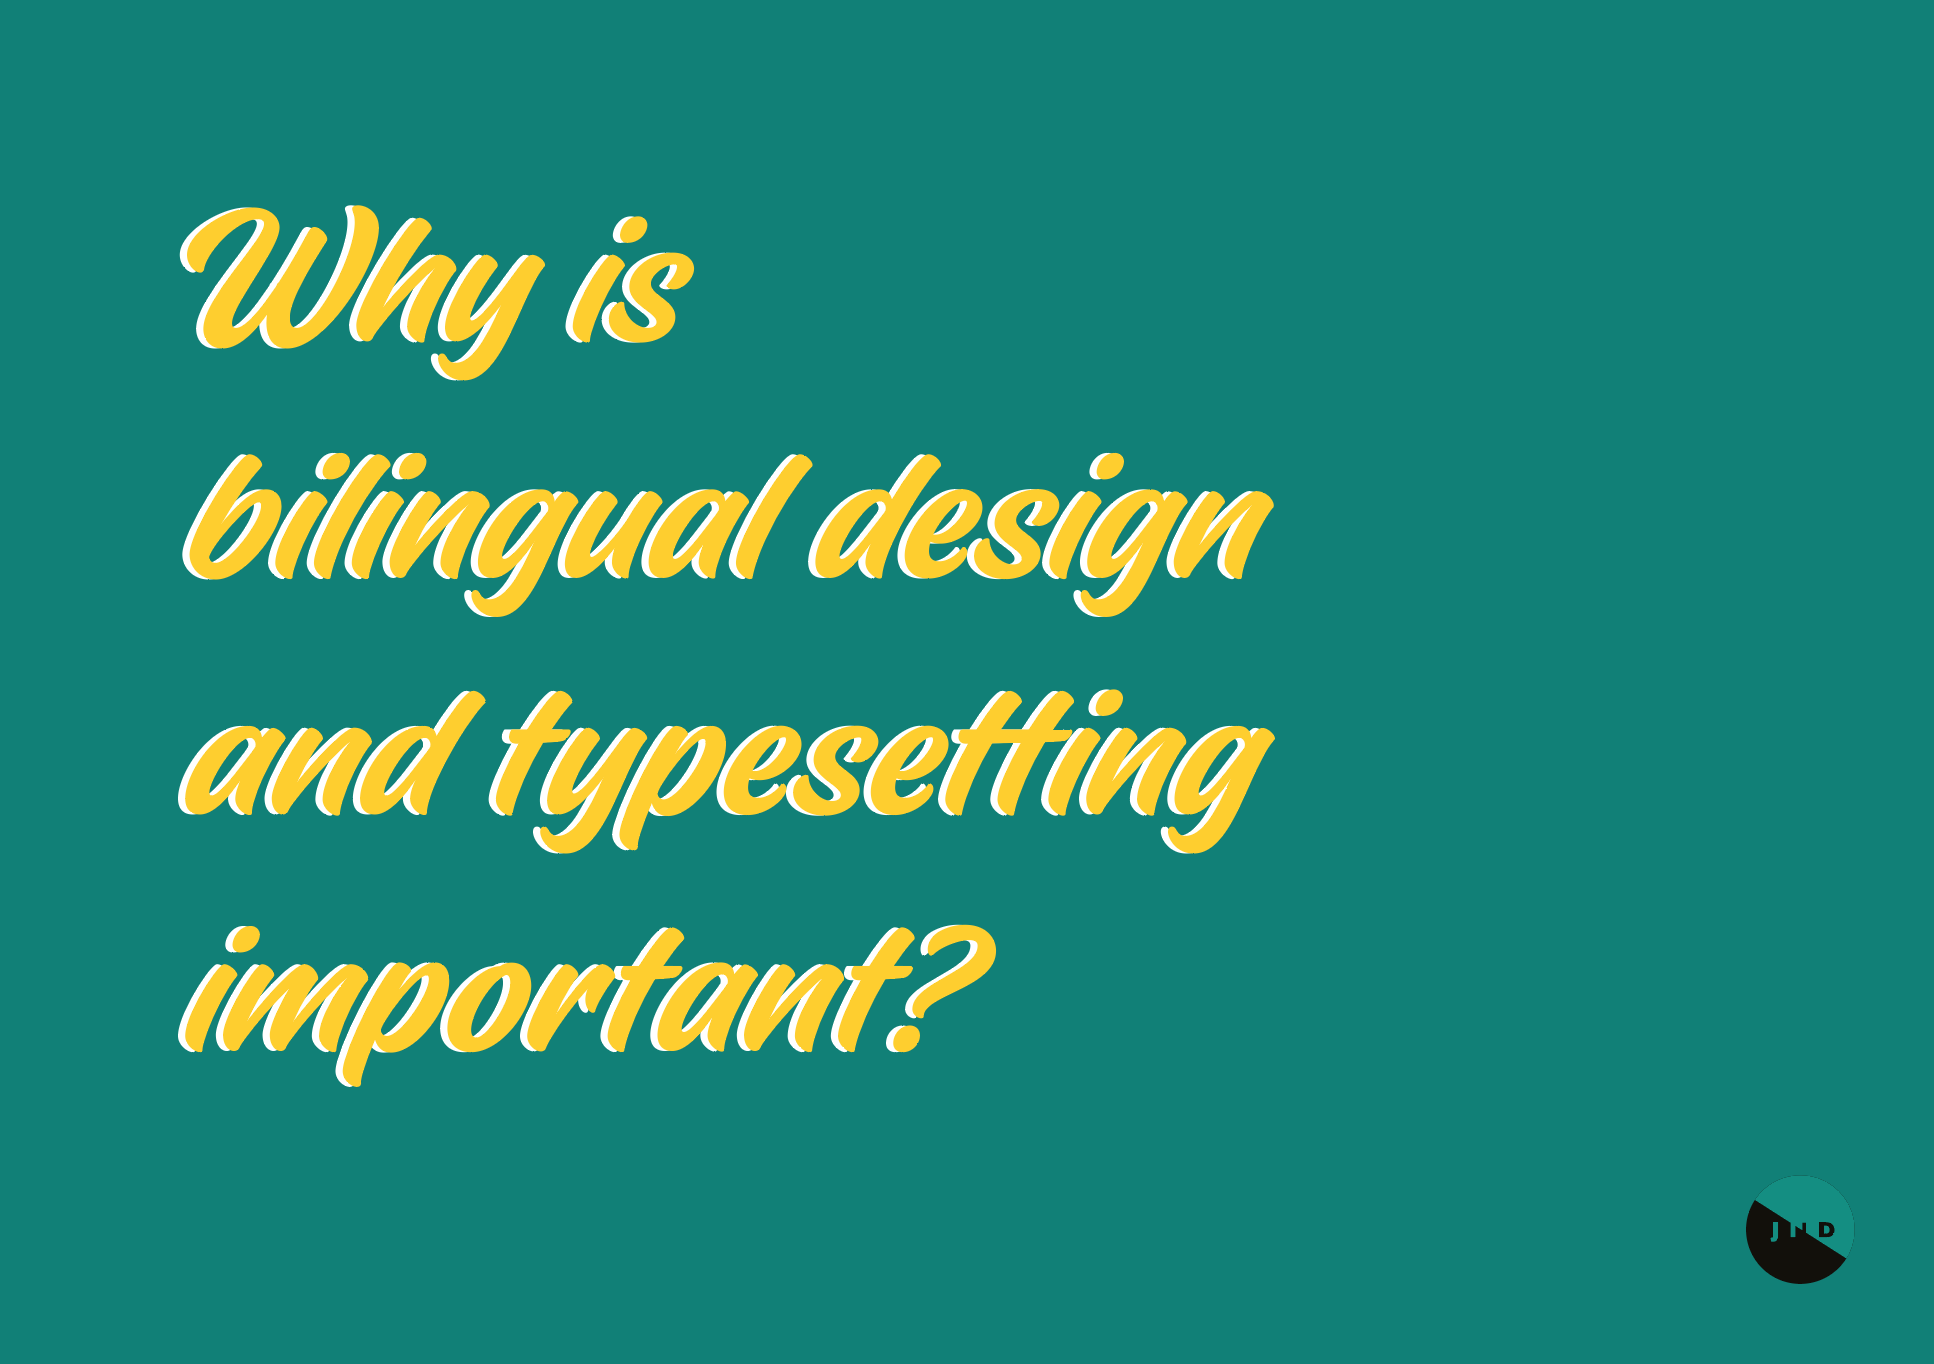 eBook title page, text 'Why is bilingual design and typesetting important eBook'